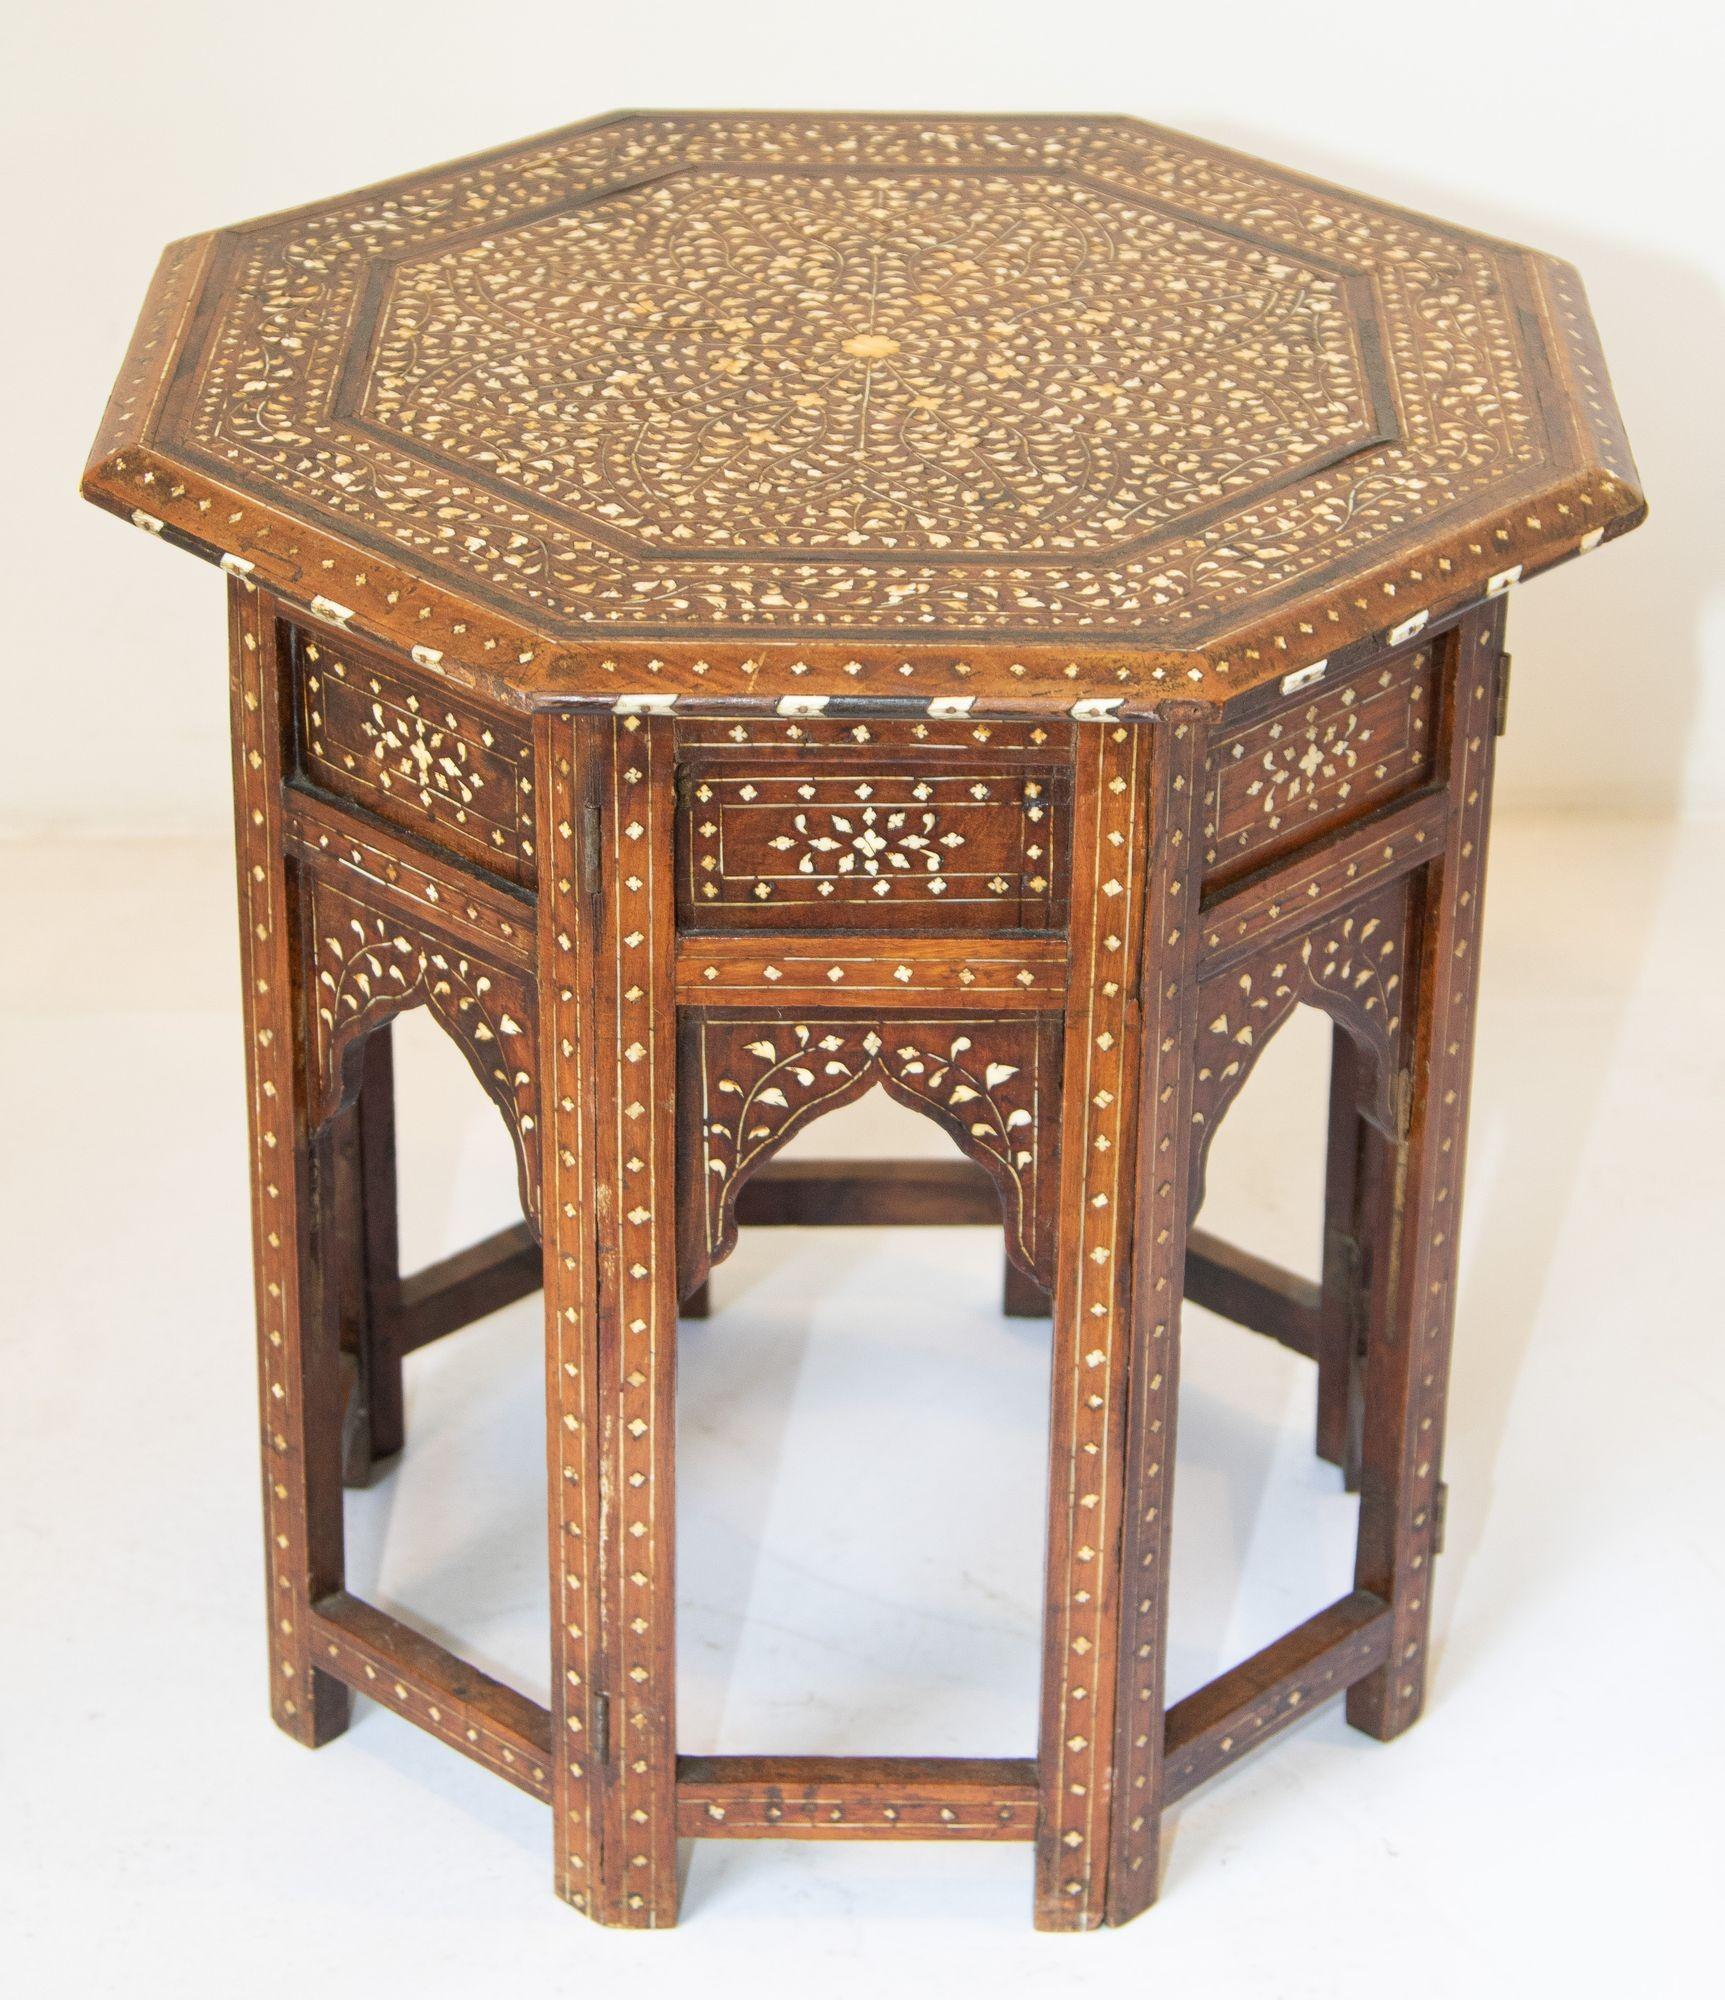 Antique Anglo-Indian Octagonal Mughal Moorish Table with Bone Inlay India 7